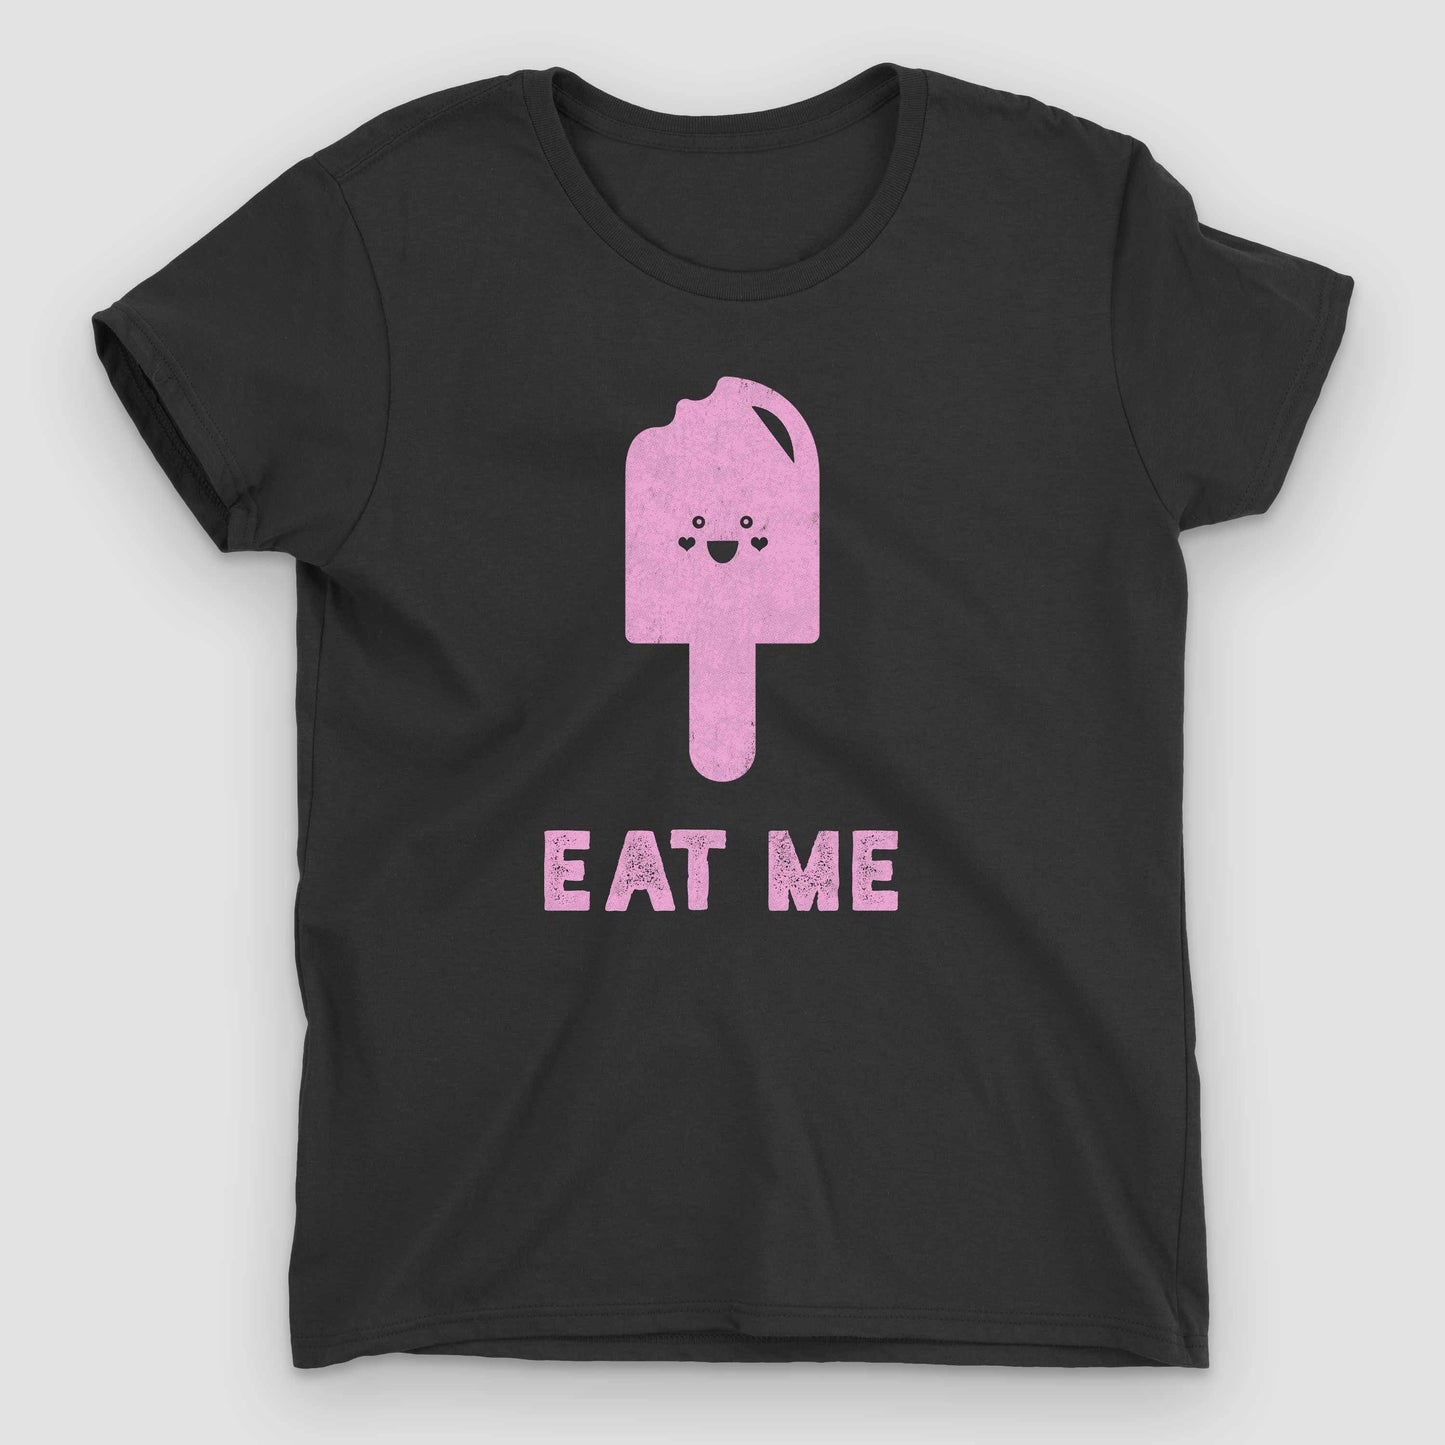 Black Eat Me Women's Graphic T-Shirt by Snaxtime